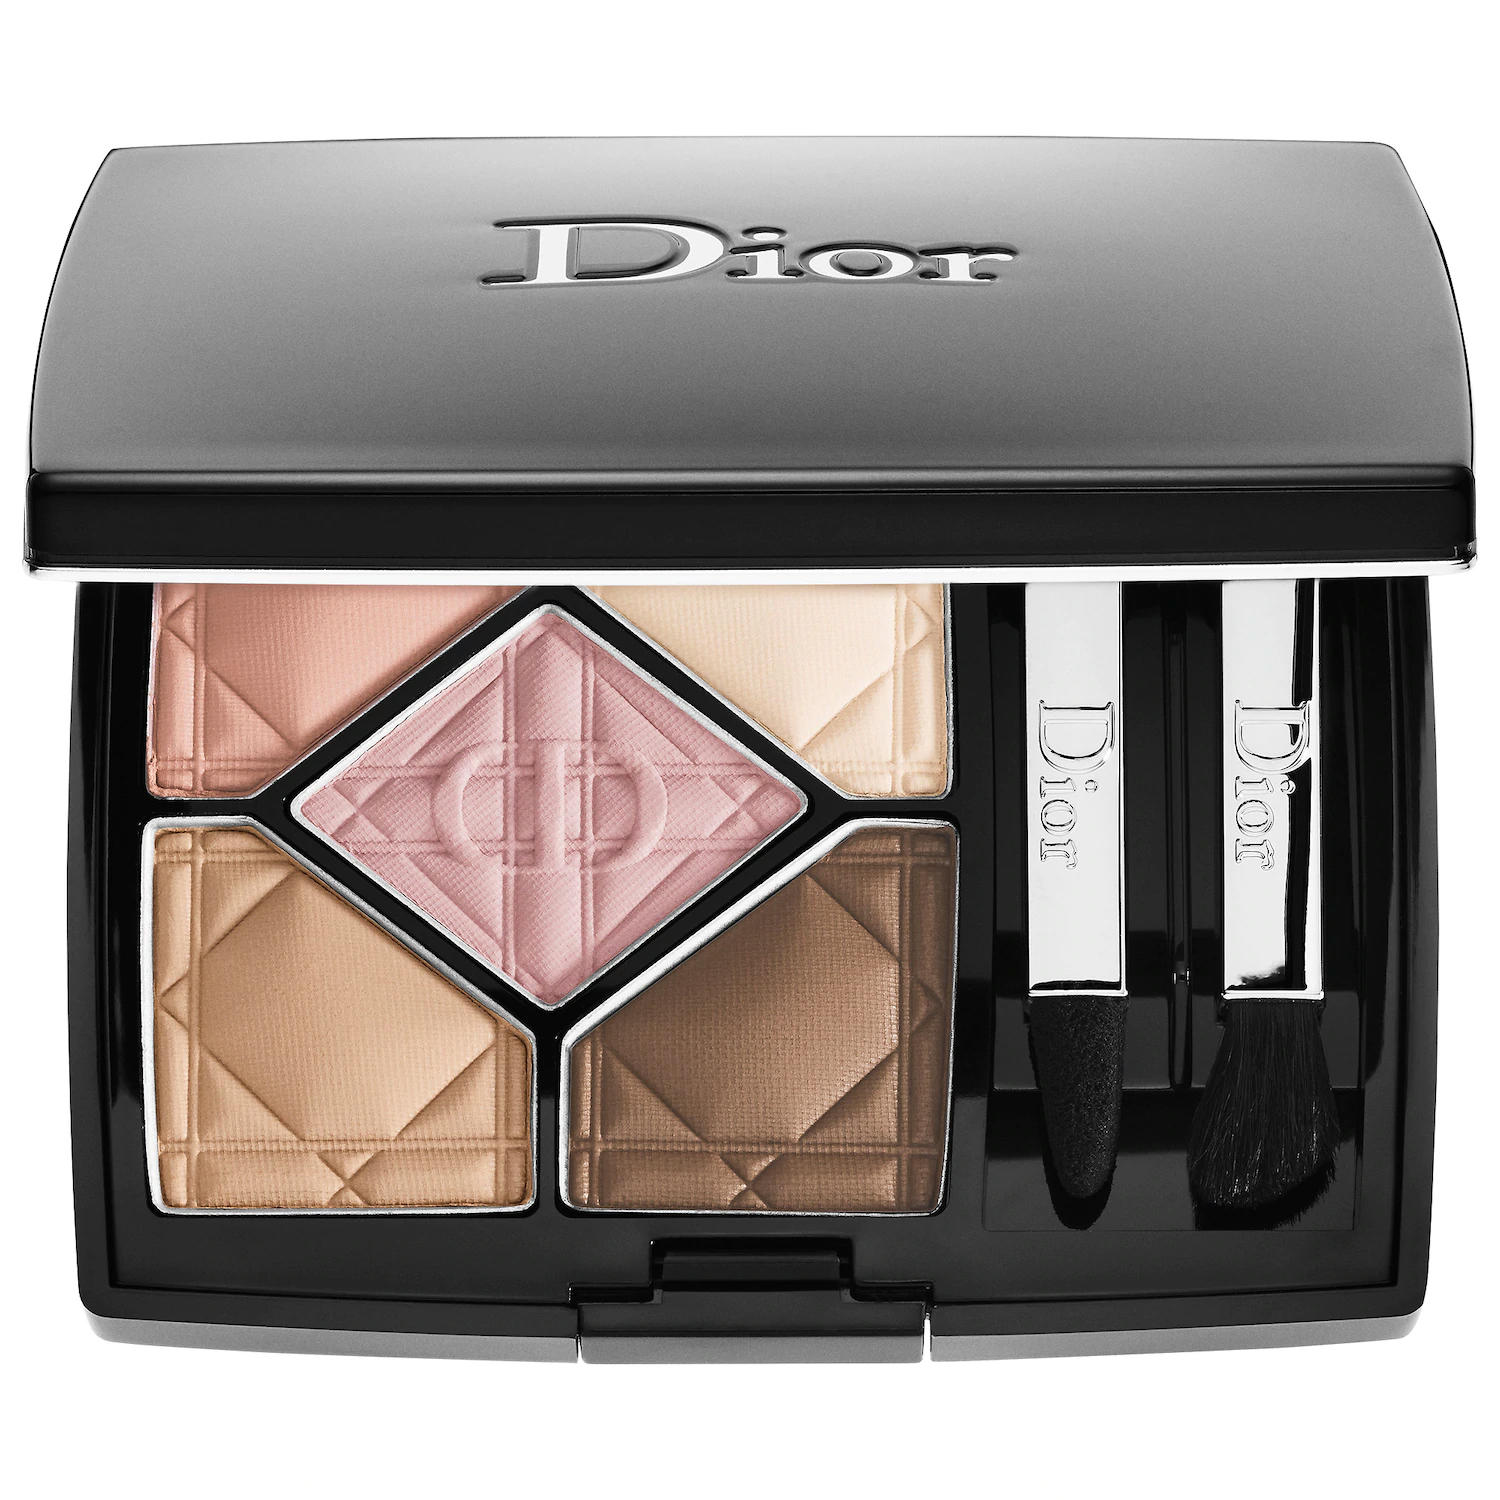 dior 5 couleurs eyeshadow palette 537 touch matte